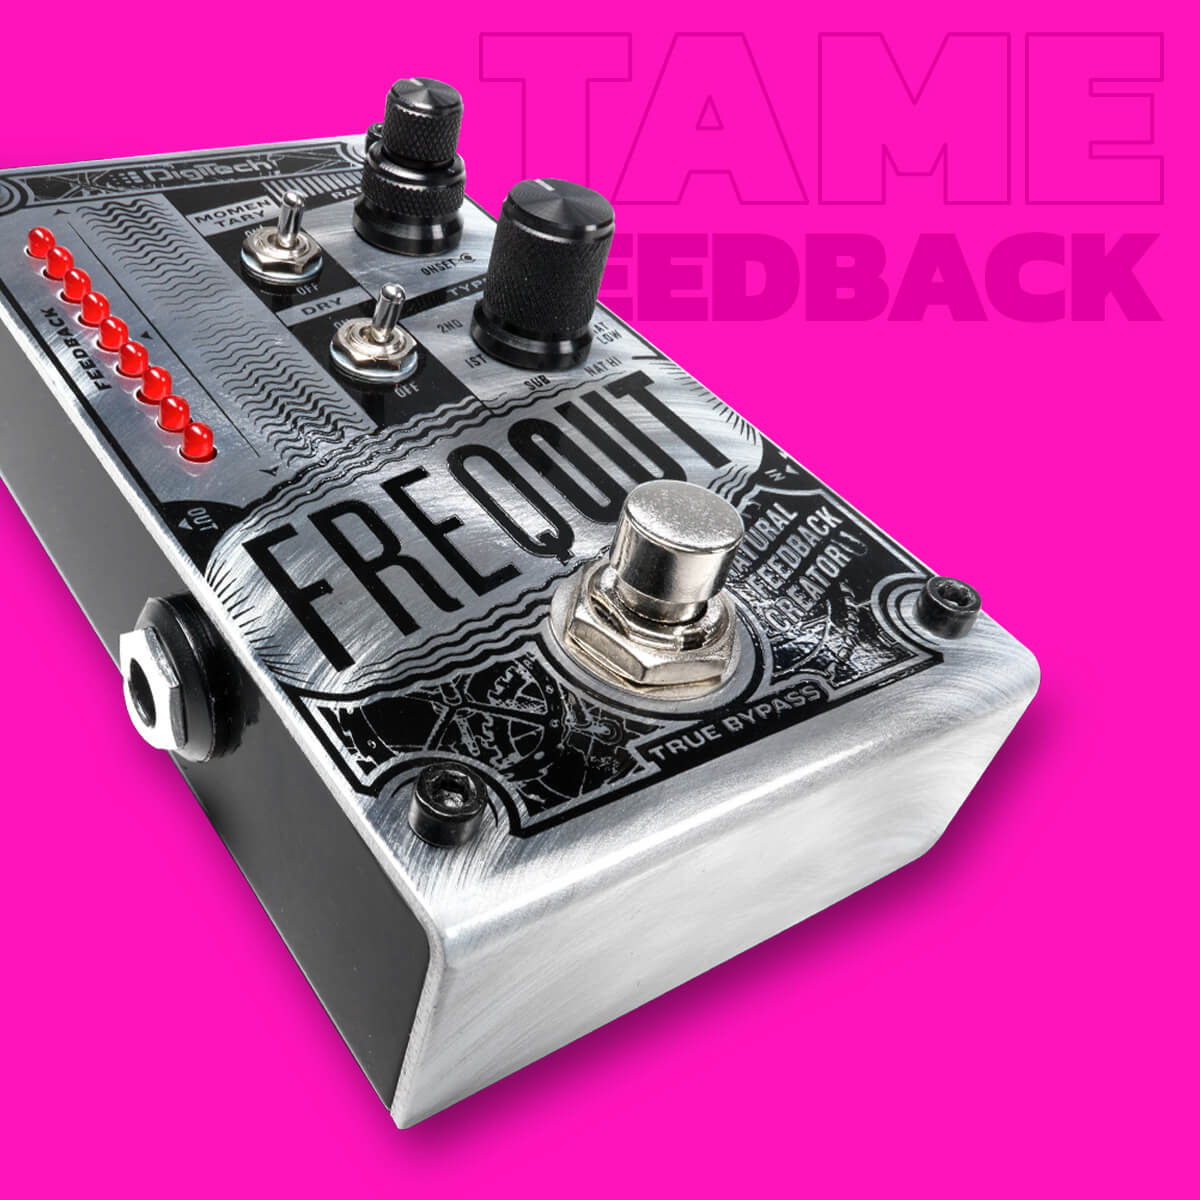 DigiTech FreqOut natural feedback creator in silver with black graphics, pink background that says 